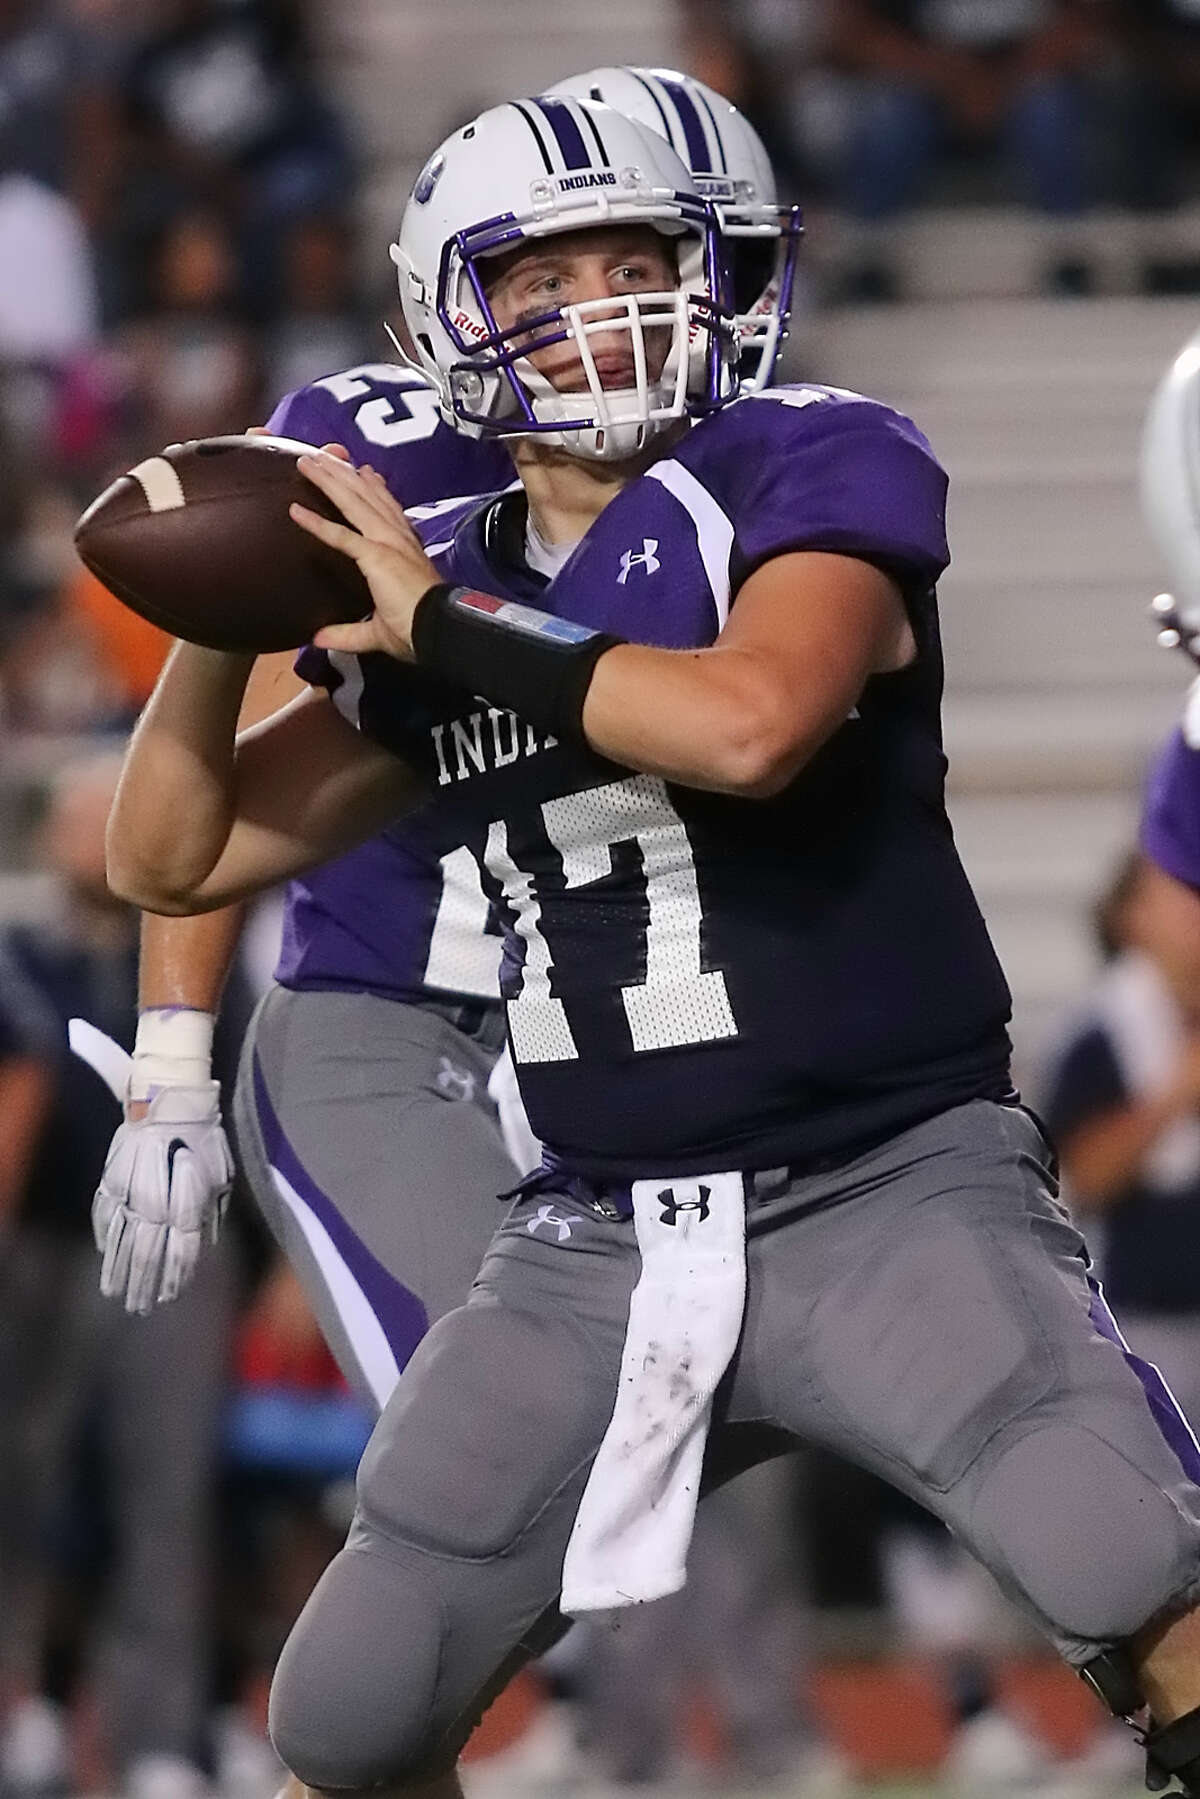 PNG's Adam Morse, 17, prepares to pass during the game between the Port Neches-Groves Indians and the West Orange-Stark Mustangs at The Reservation, Friday, September 4, 2015. Photo provided by Kyle Ezell